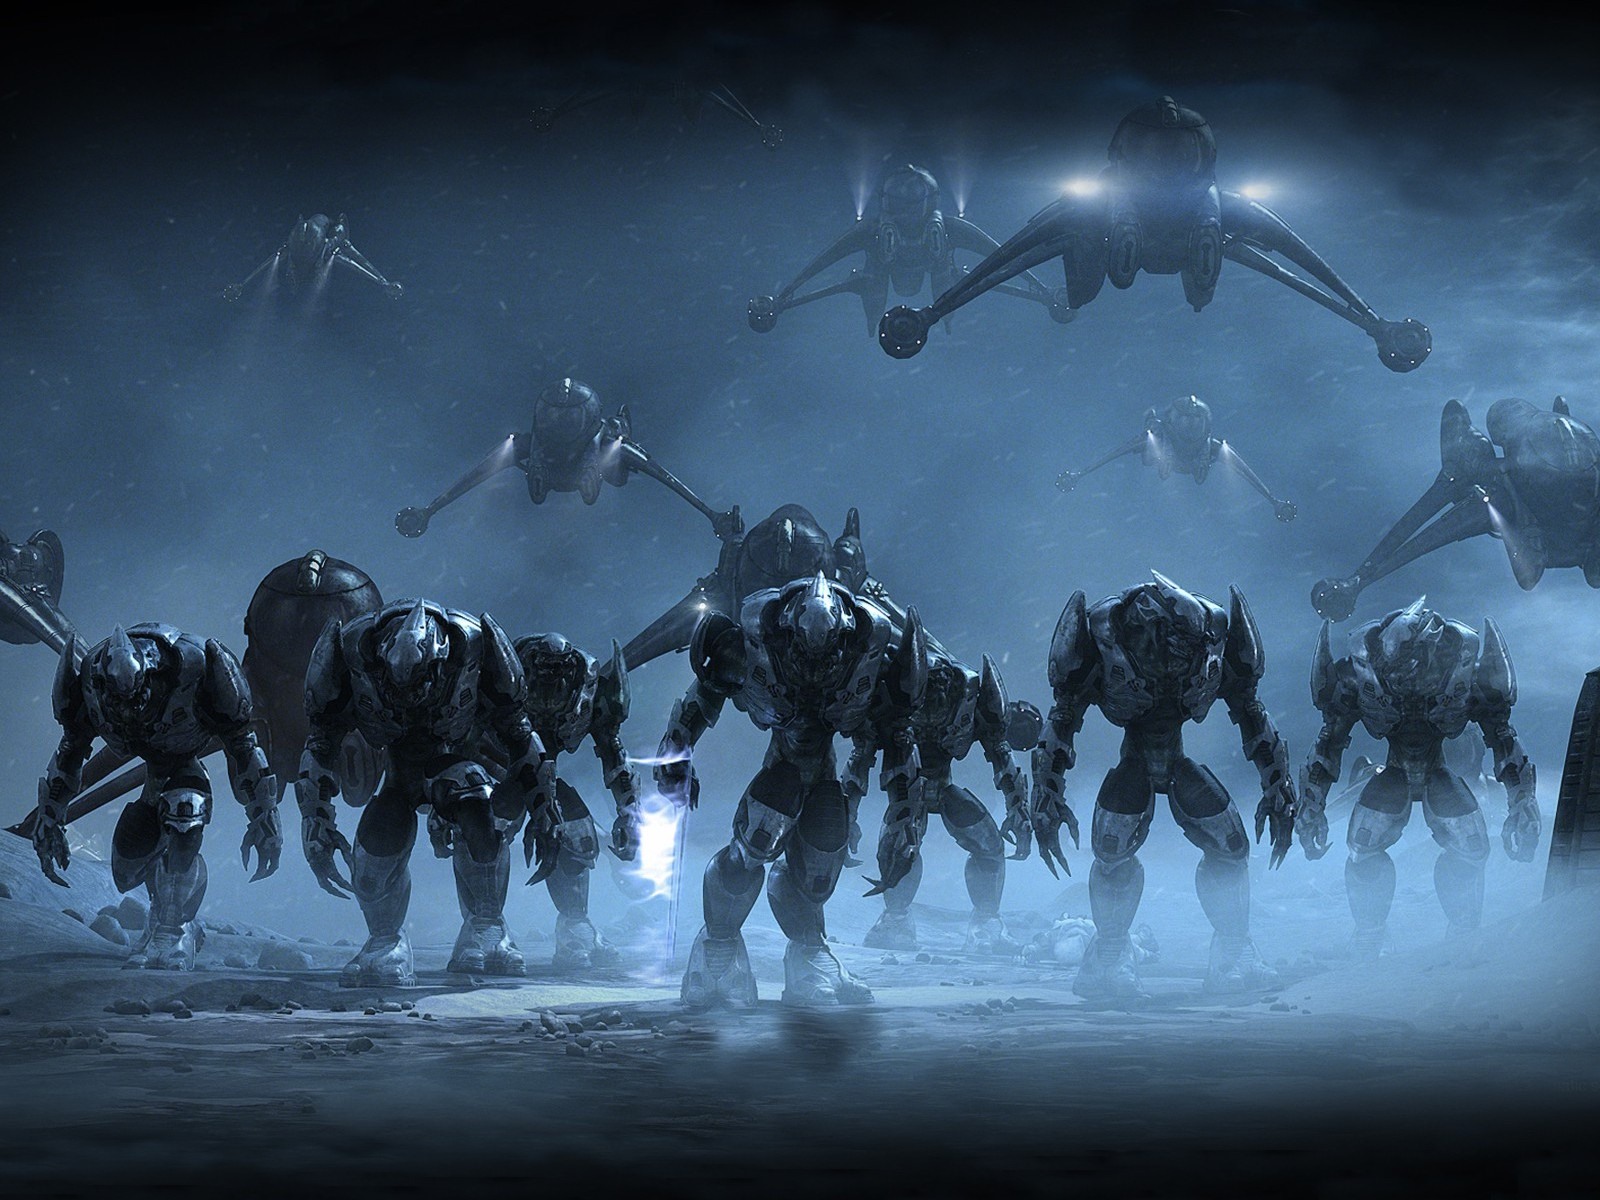 Halo game HD wallpapers #26 - 1600x1200